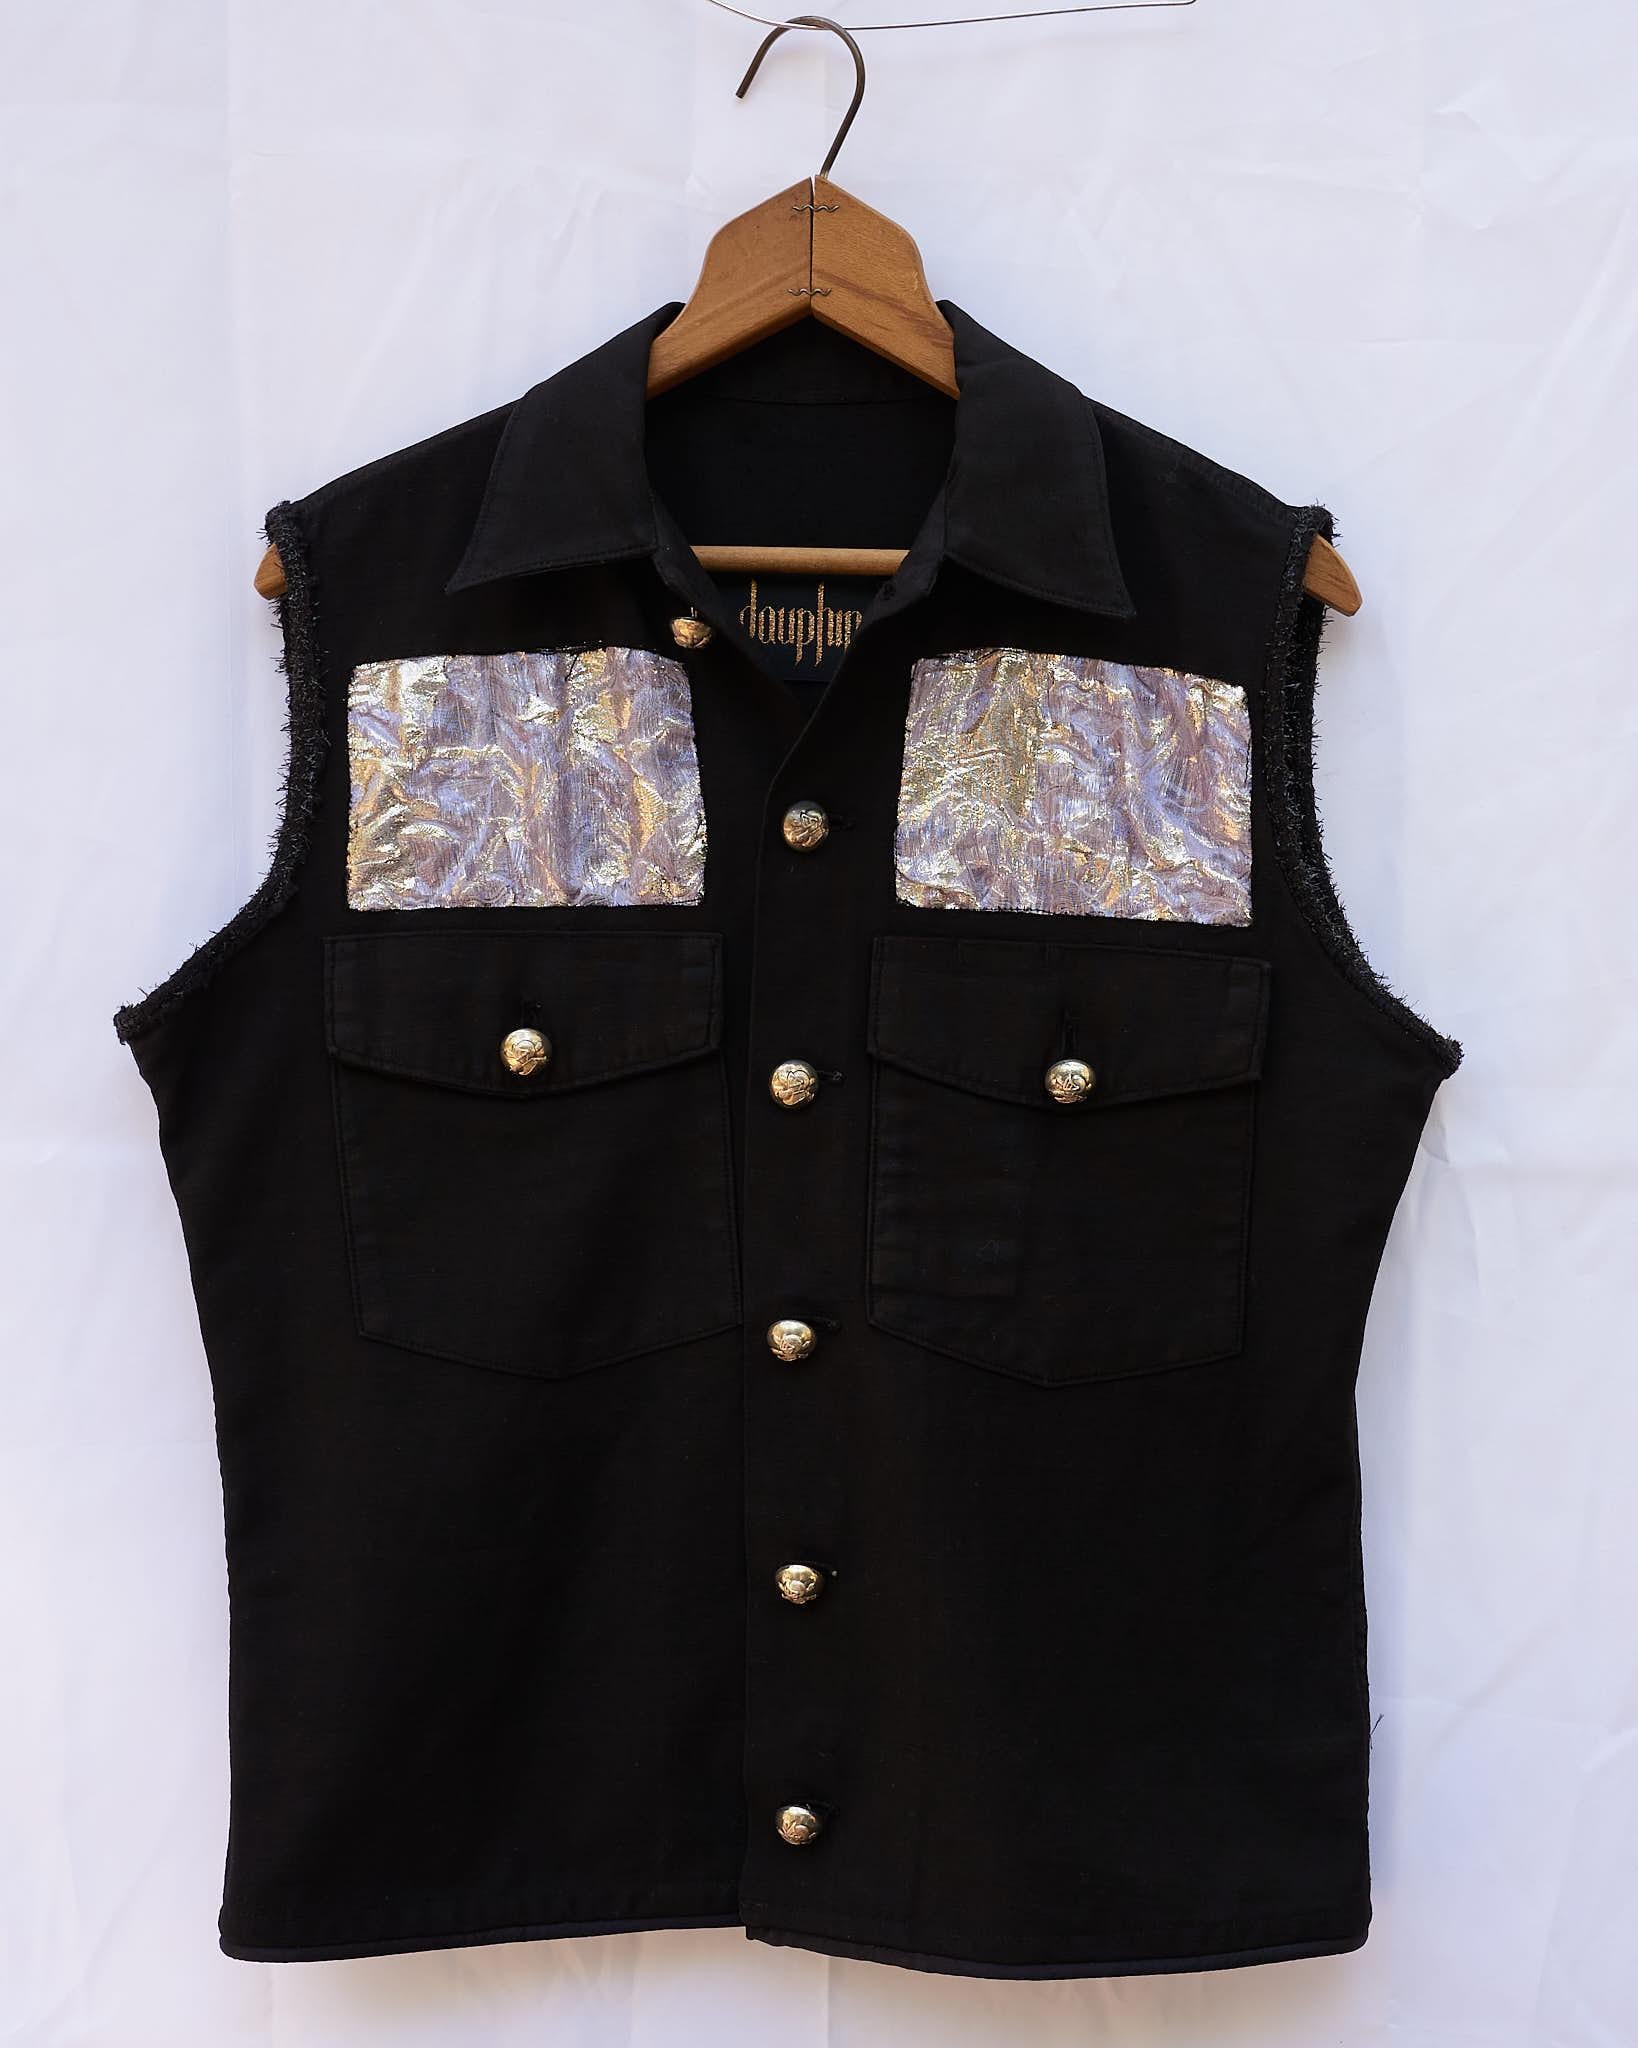 Embellished Black Sleeveless Vintage Military Jacket Repurposed into a Vest with Black Lurex Tweed and Lilac Silver Lurex Brocade, Vintage Collectible Military Vintage Silver Tone Buttons in Brass.

This is a One of a kind Jacket, Fully Sustainable